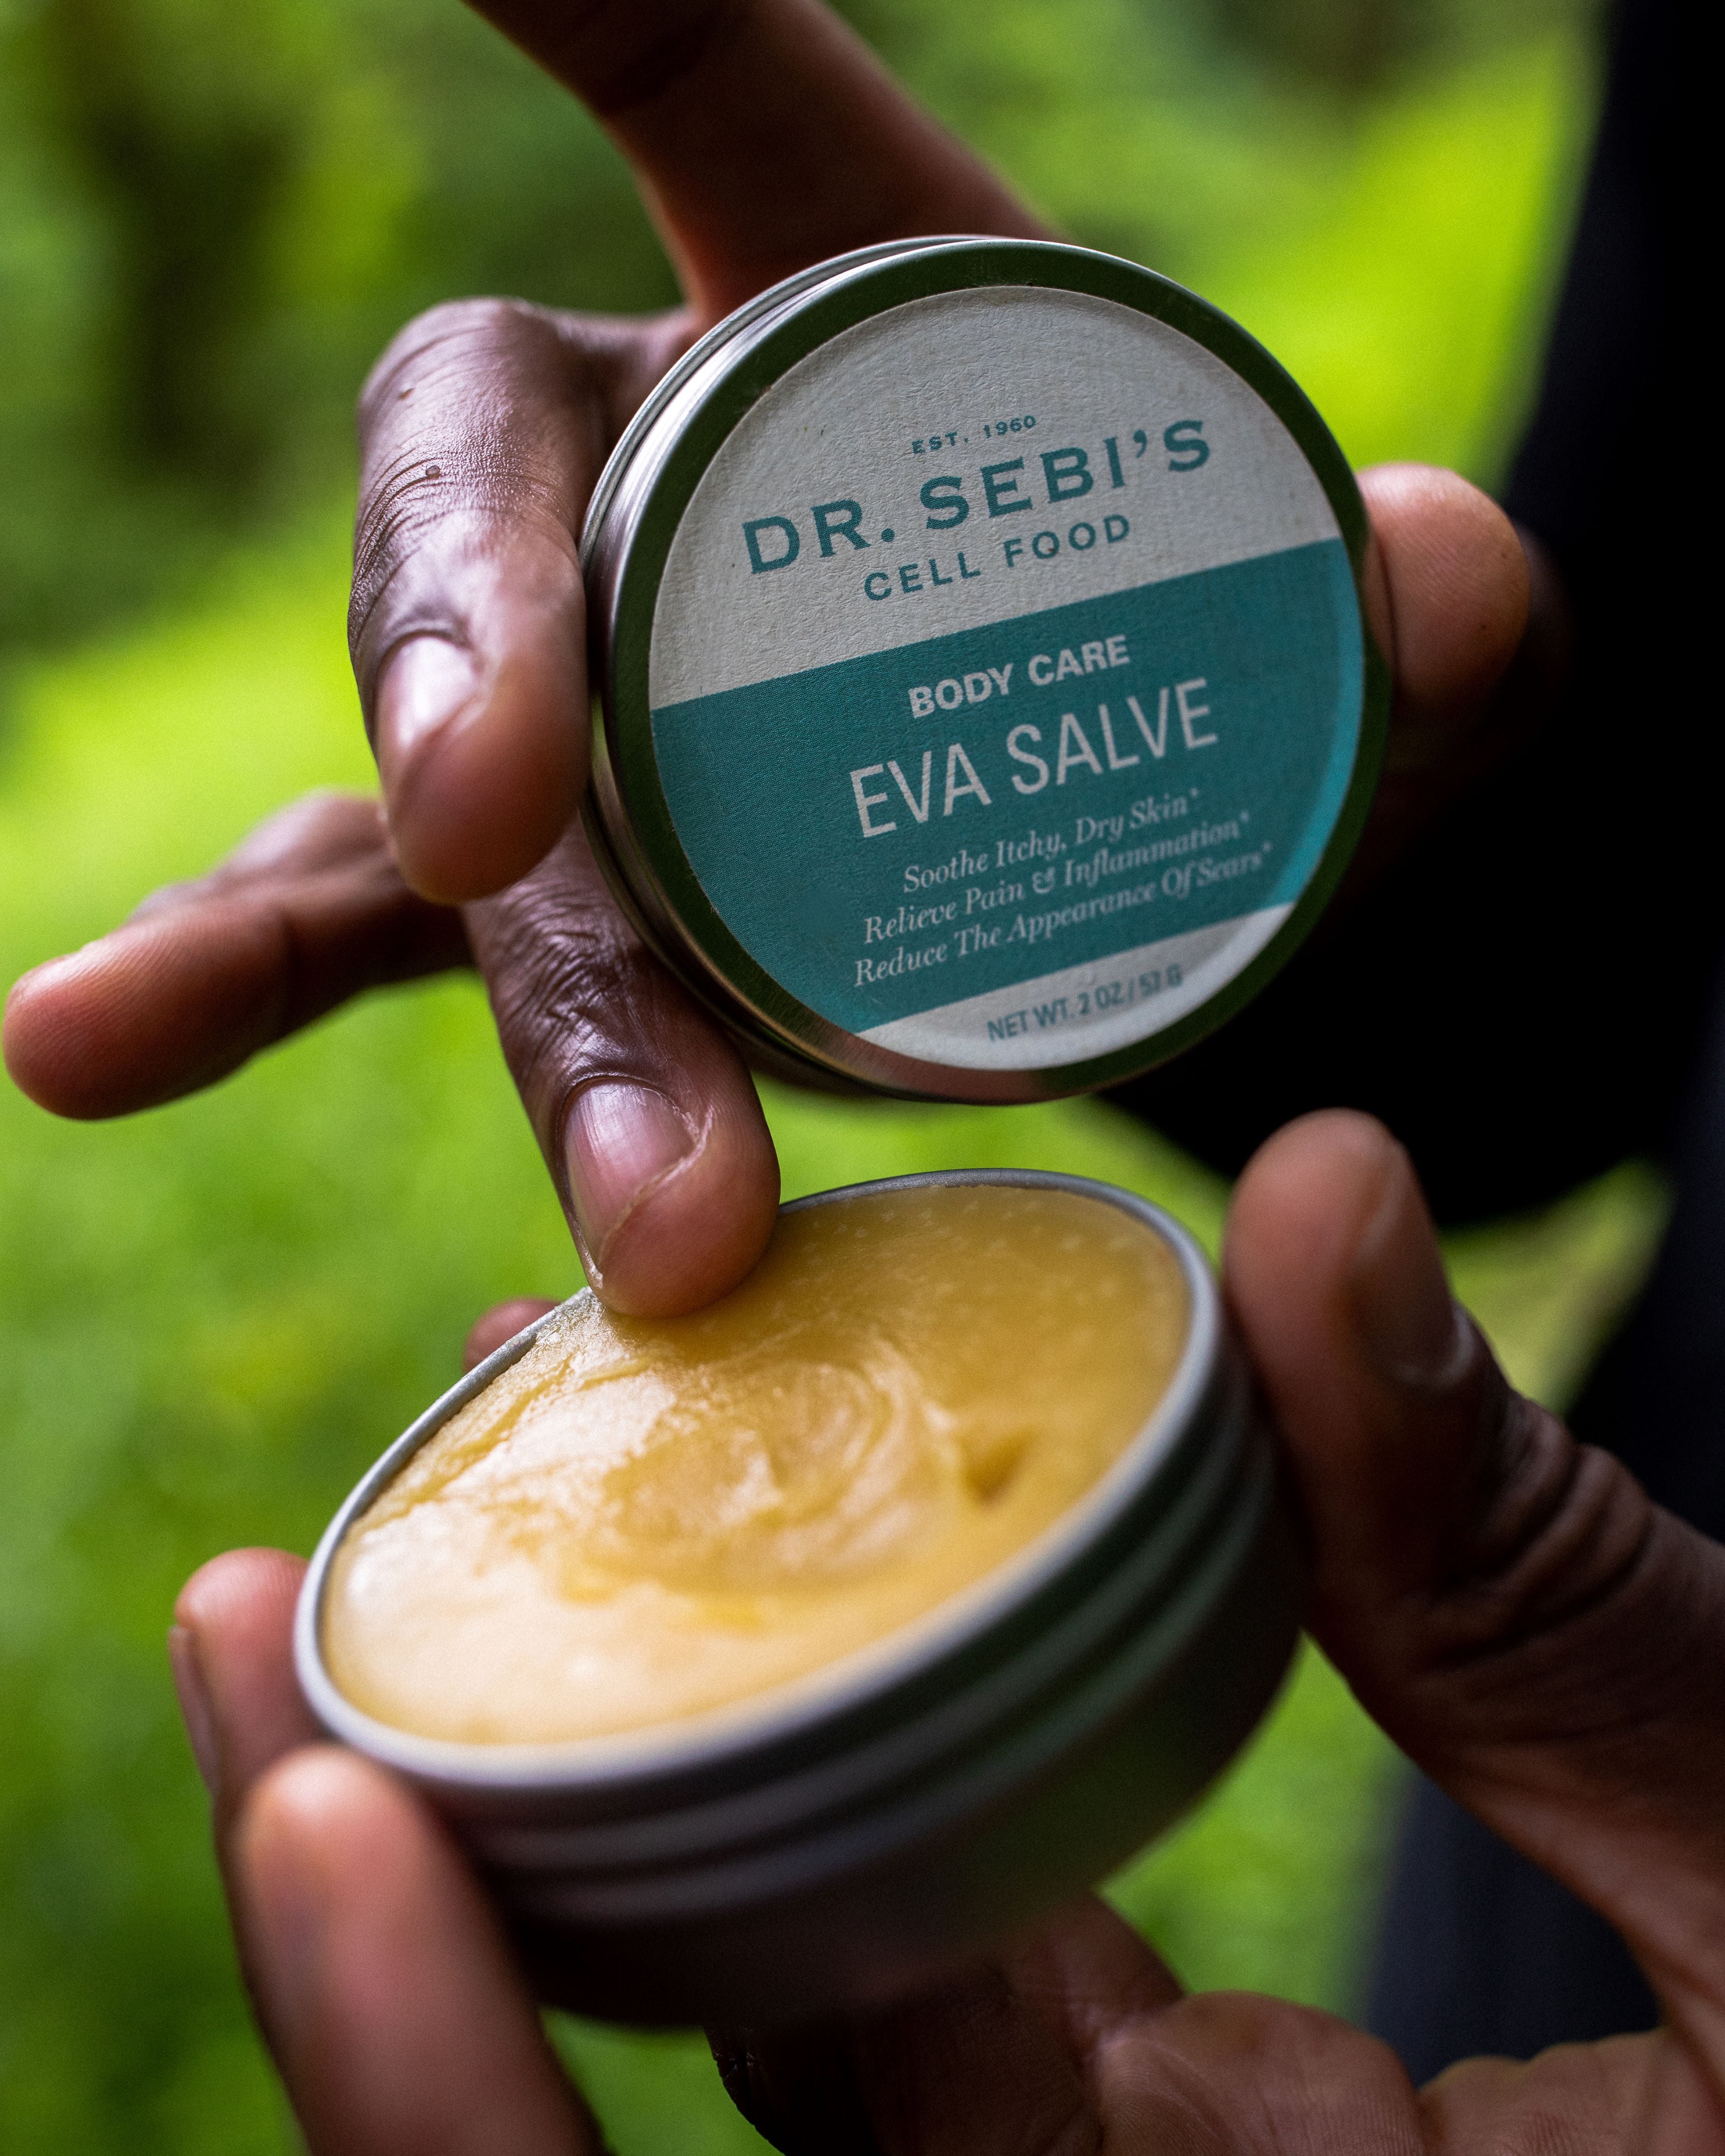 Dr. Sebi's Cell Food was founded by Dr. Sebi: Official Web Store